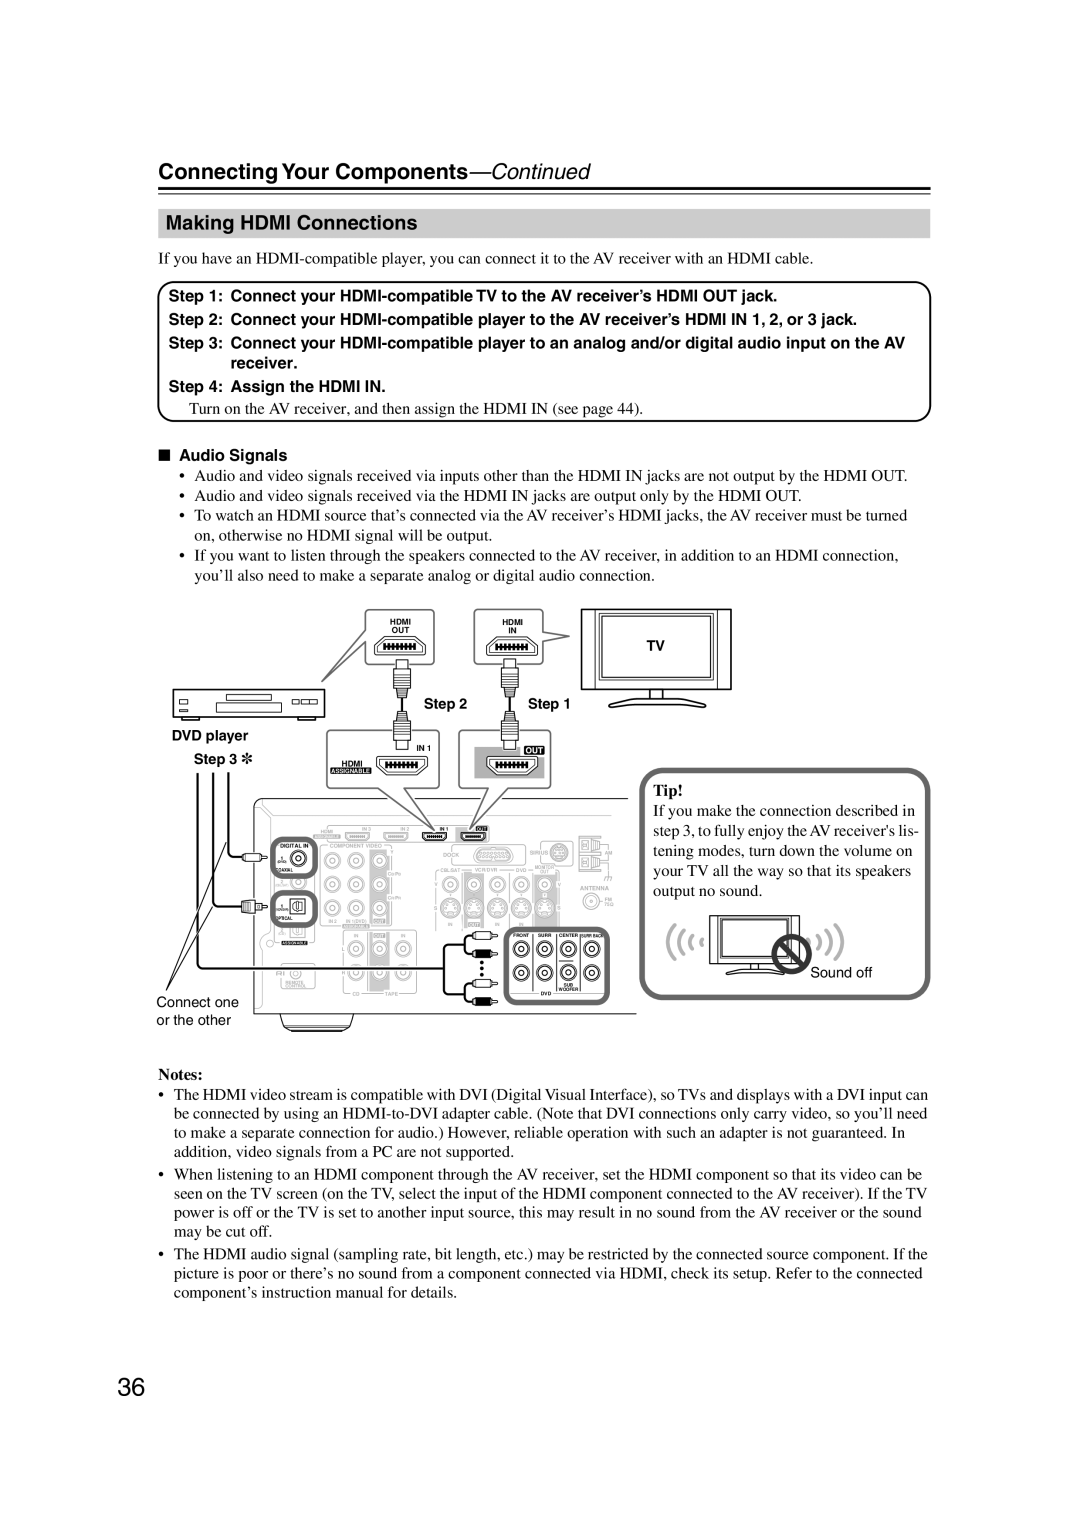 Onkyo HT-S5100 instruction manual Making HDMI Connections, Connecting Your Components—Continued, Notes 